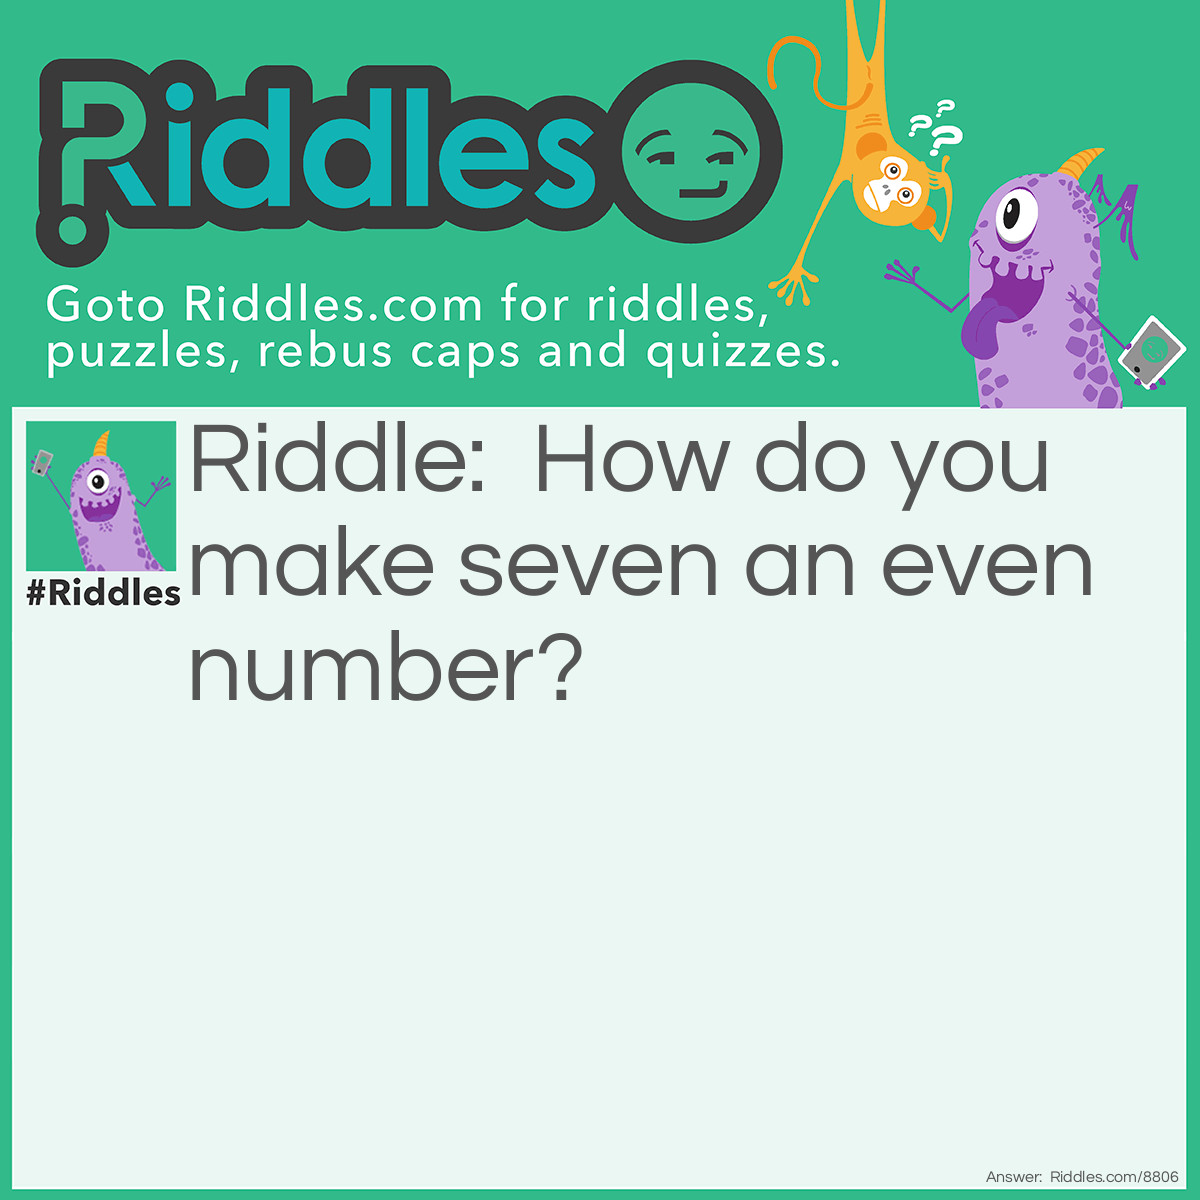 Riddle: How do you make seven an even number? Answer: Take the 'S' away.